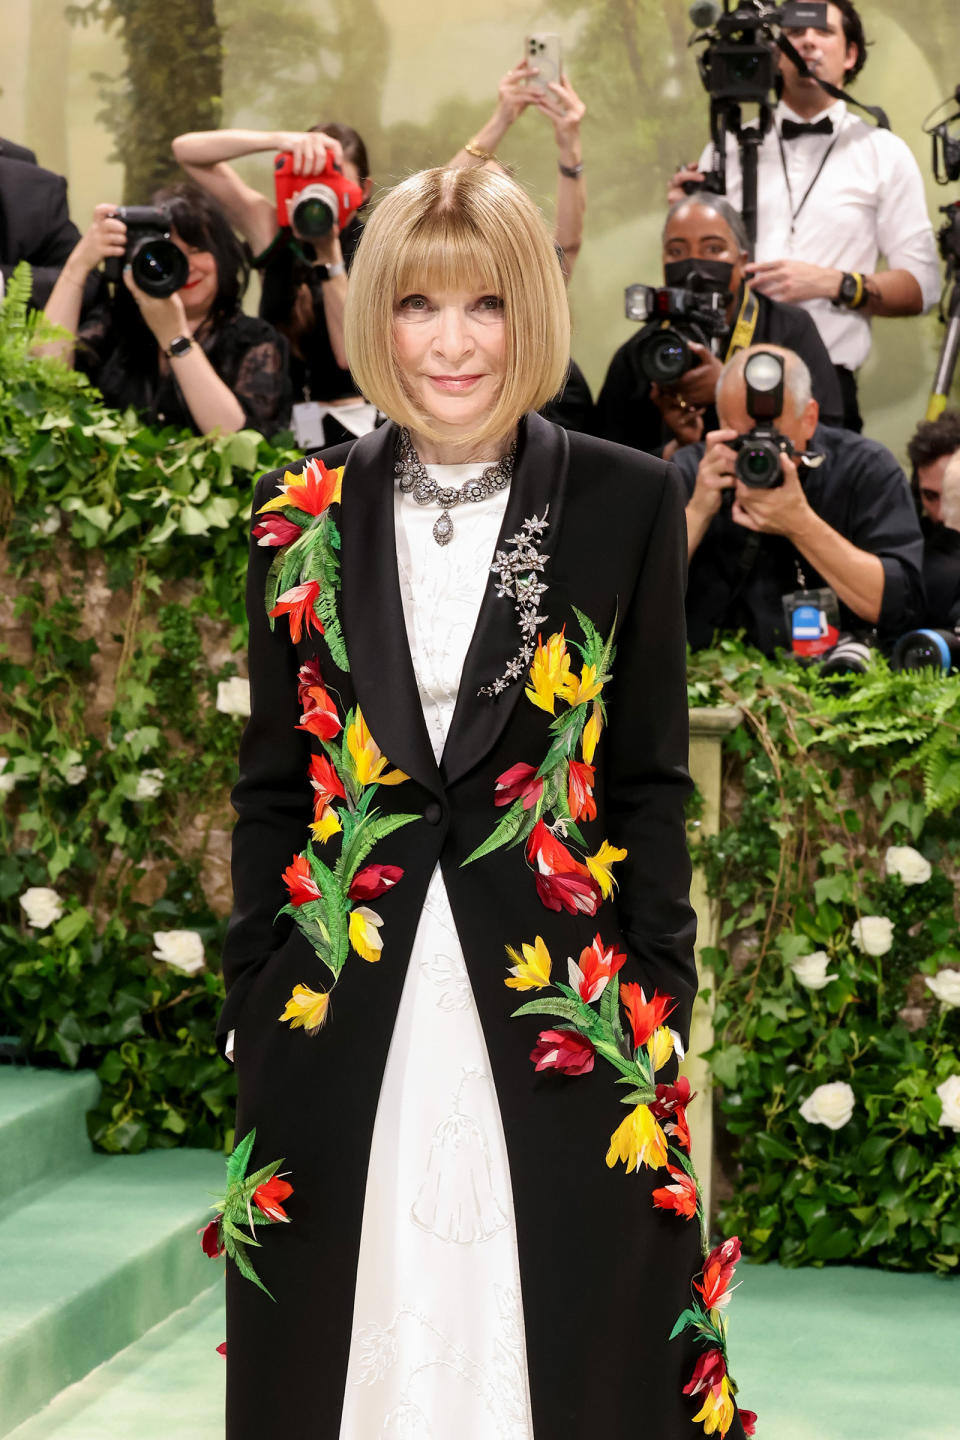 Anna Wintour<span class="copyright">John Shearer—WireImage/Getty Images</span>